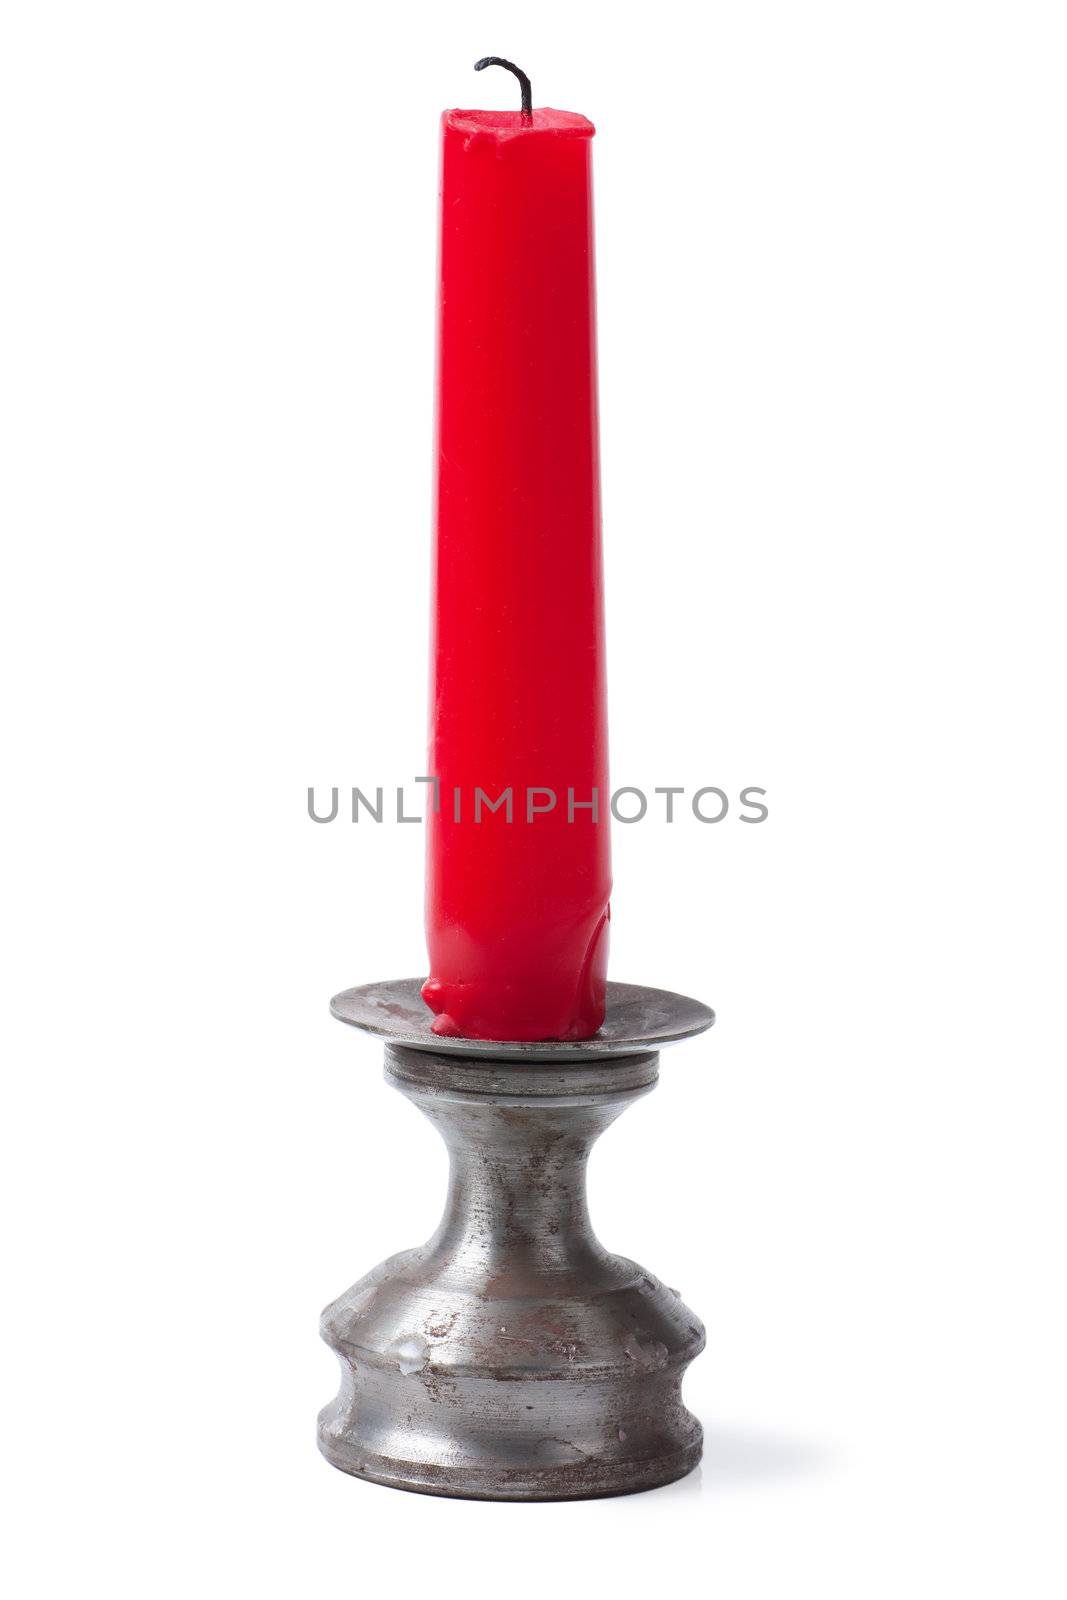 An unlit red candle isolated on the white